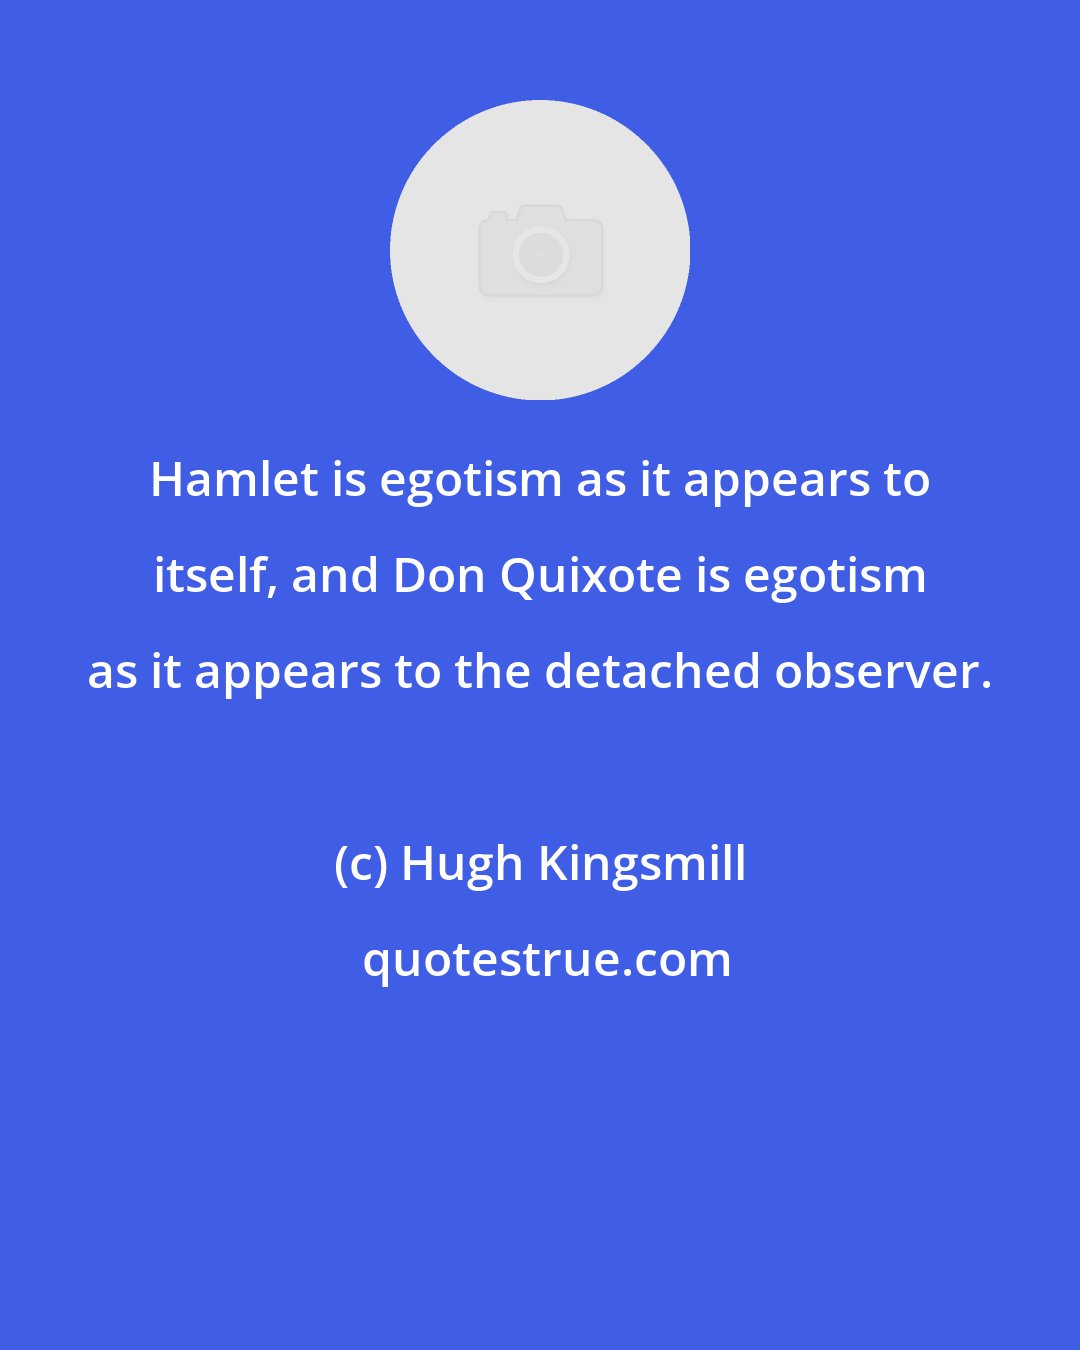 Hugh Kingsmill: Hamlet is egotism as it appears to itself, and Don Quixote is egotism as it appears to the detached observer.